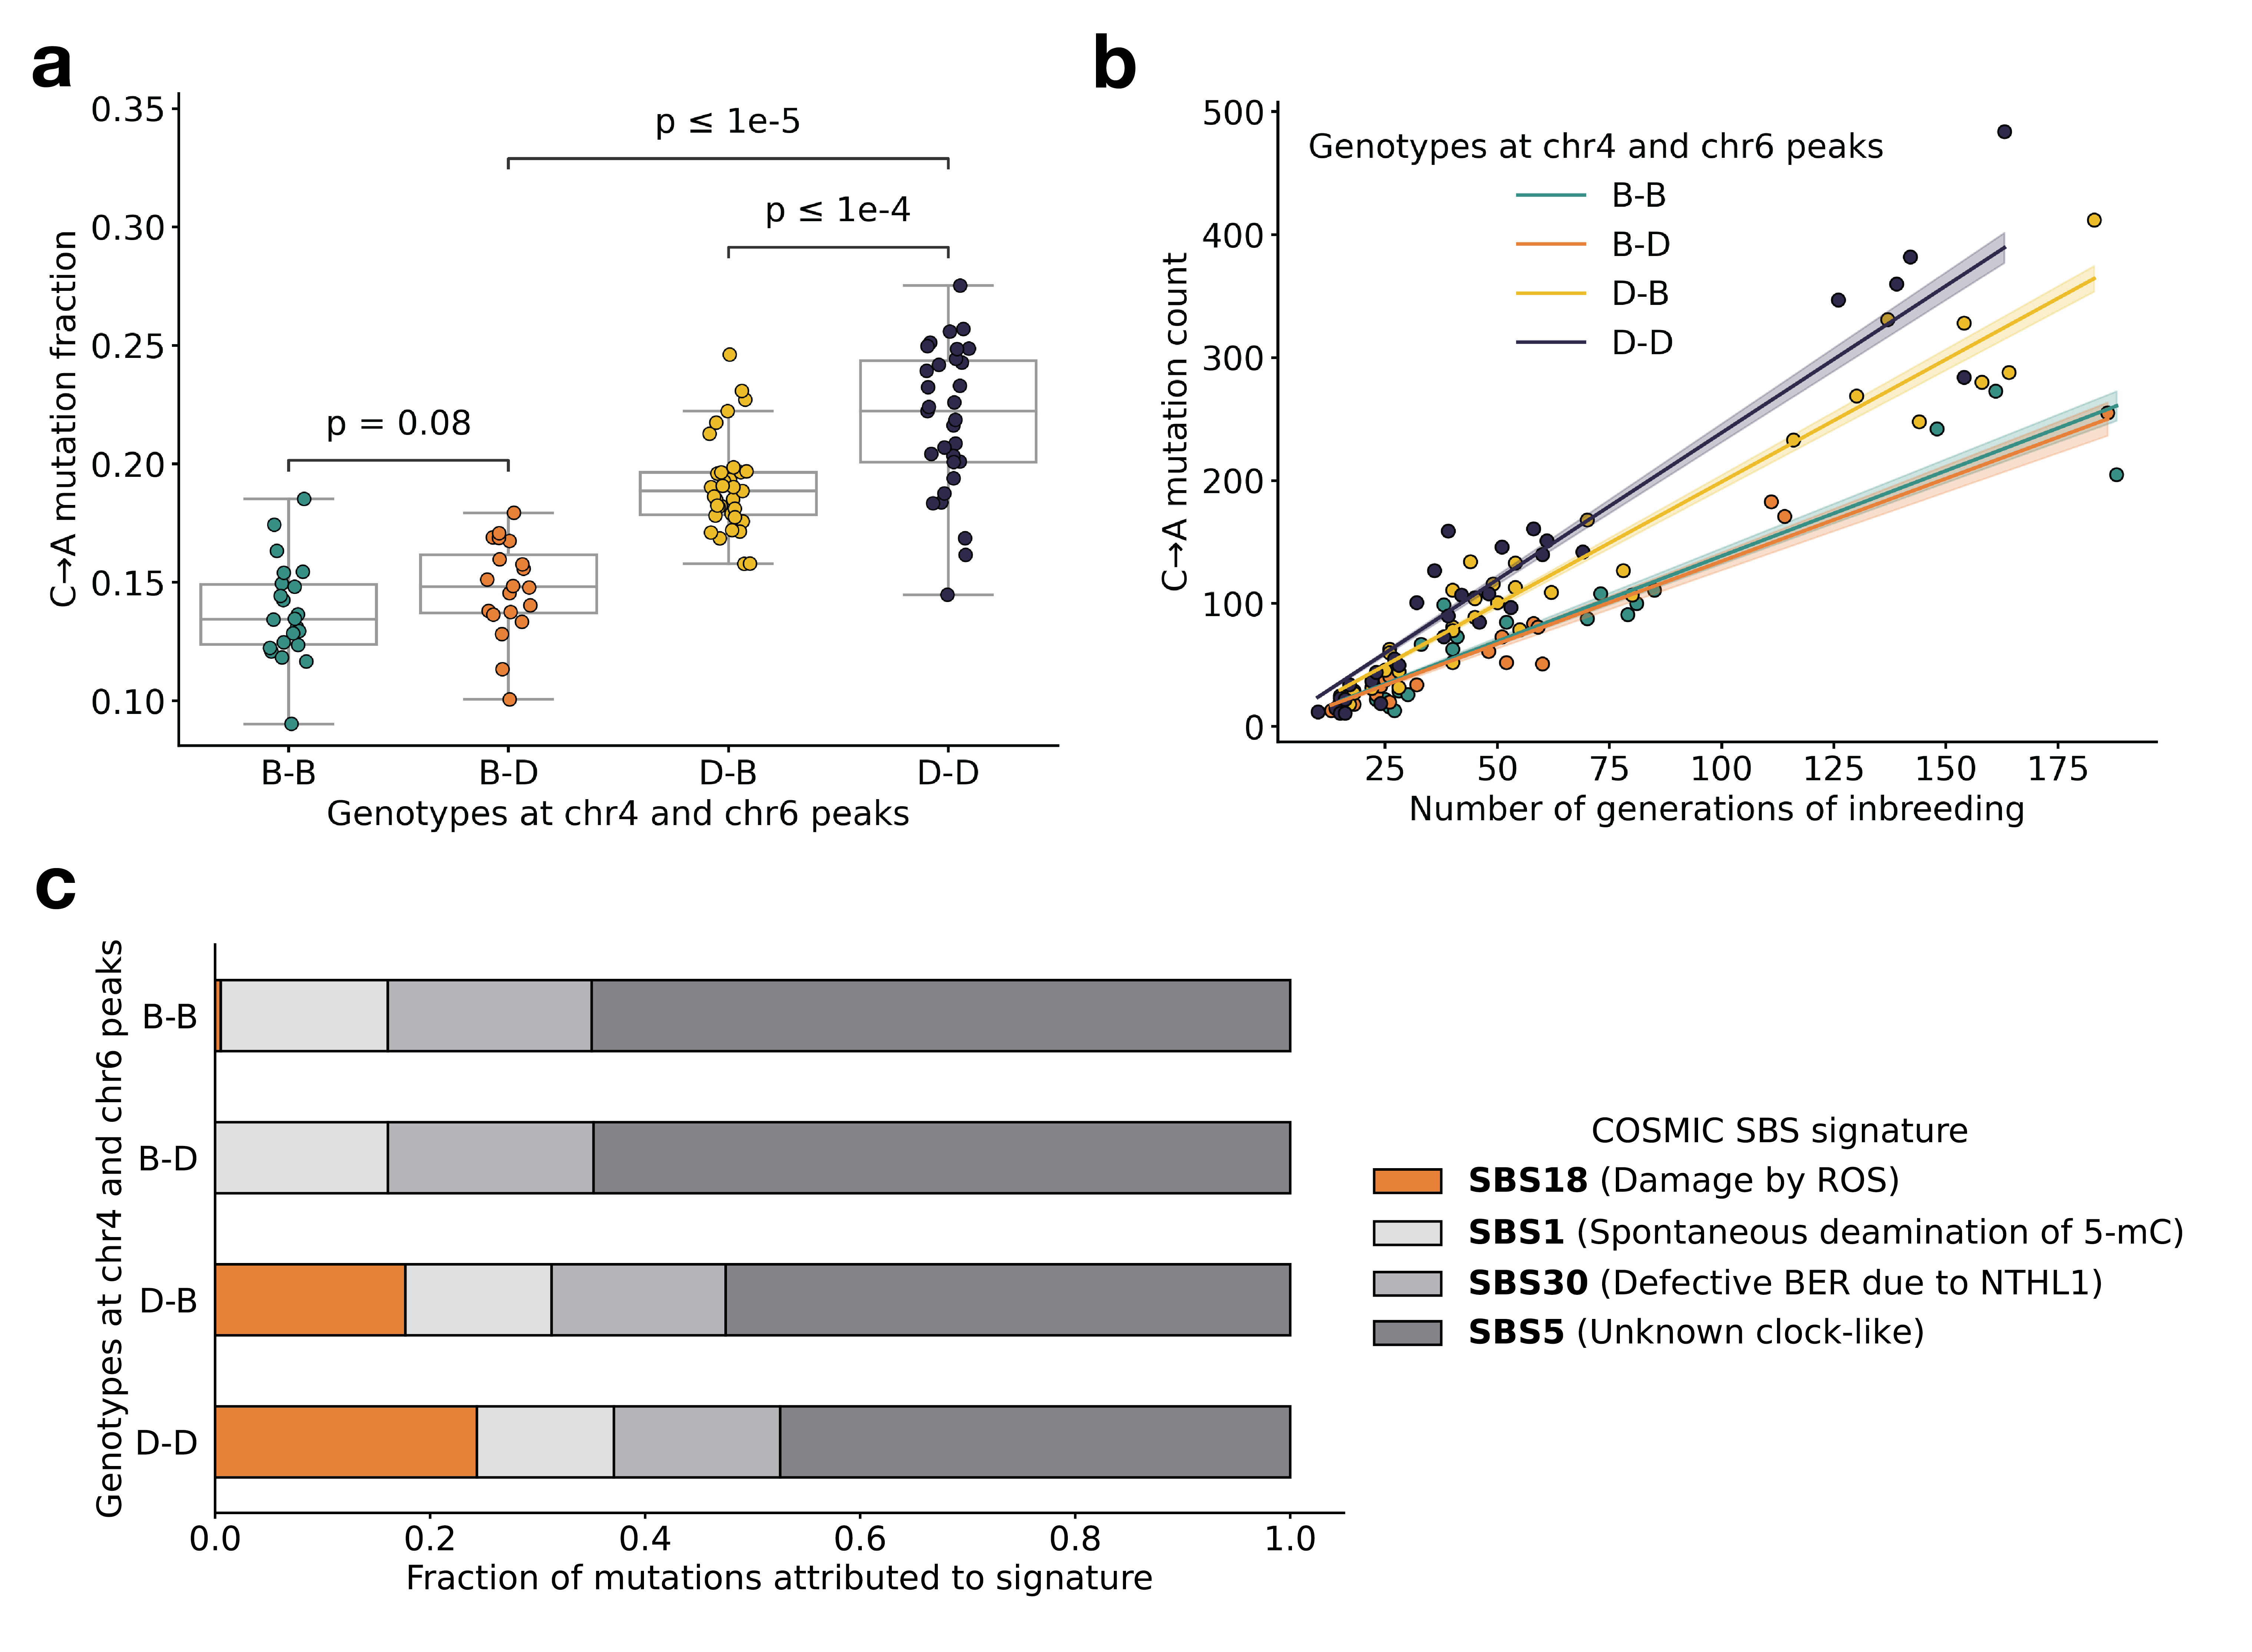 Figure 3: BXD mutation spectra are affected by alleles at both mutator loci. a) C>A de novo germline mutation fractions in BXDs with either D or B genotypes at markers rs27509845 (chr4 peak) and rs46276051 (chr6 peak). Distributions of C>A mutation fractions were compared with two-sided Mann-Whitney U-tests; annotated p-values are uncorrected. B-B vs. B-D comparison: U-statistic = 149.0, p = 7.58e-2; B-D vs D-D comparison: U-statistic = 21.0, p = 2.61e-8; D-B vs D-D comparison: U-statistic = 232.5, p = 6.99e-5. b) The count of C>A de novo germline mutations in each BXD was plotted against the number of generations for which it was inbred. Lines represent predicted C>A counts in each haplotype group from a generalized linear model (Poisson family, identity link), and shading around each line represents the 95% confidence interval. c) Germline mutations in each BXD were assigned to COSMIC SBS mutation signatures using SigProfilerExtractor [29]. After grouping BXDs by their genotypes at rs27509845 and rs46276051, we calculated the fraction of mutations in each group that was attributed to each signature. The proposed etiologies of each mutation signature are: SBS1 (spontaneous deamination of methylated cytosine nucleotides at CpG contexts), SBS5 (unknown, clock-like signature), SBS18 (damage by reactive oxygen species, related to SBS36 and defective base-excision repair due to loss-of-function mutations in MUTYH), and SBS30 (defective base-excision repair due to NTHL1 mutations).